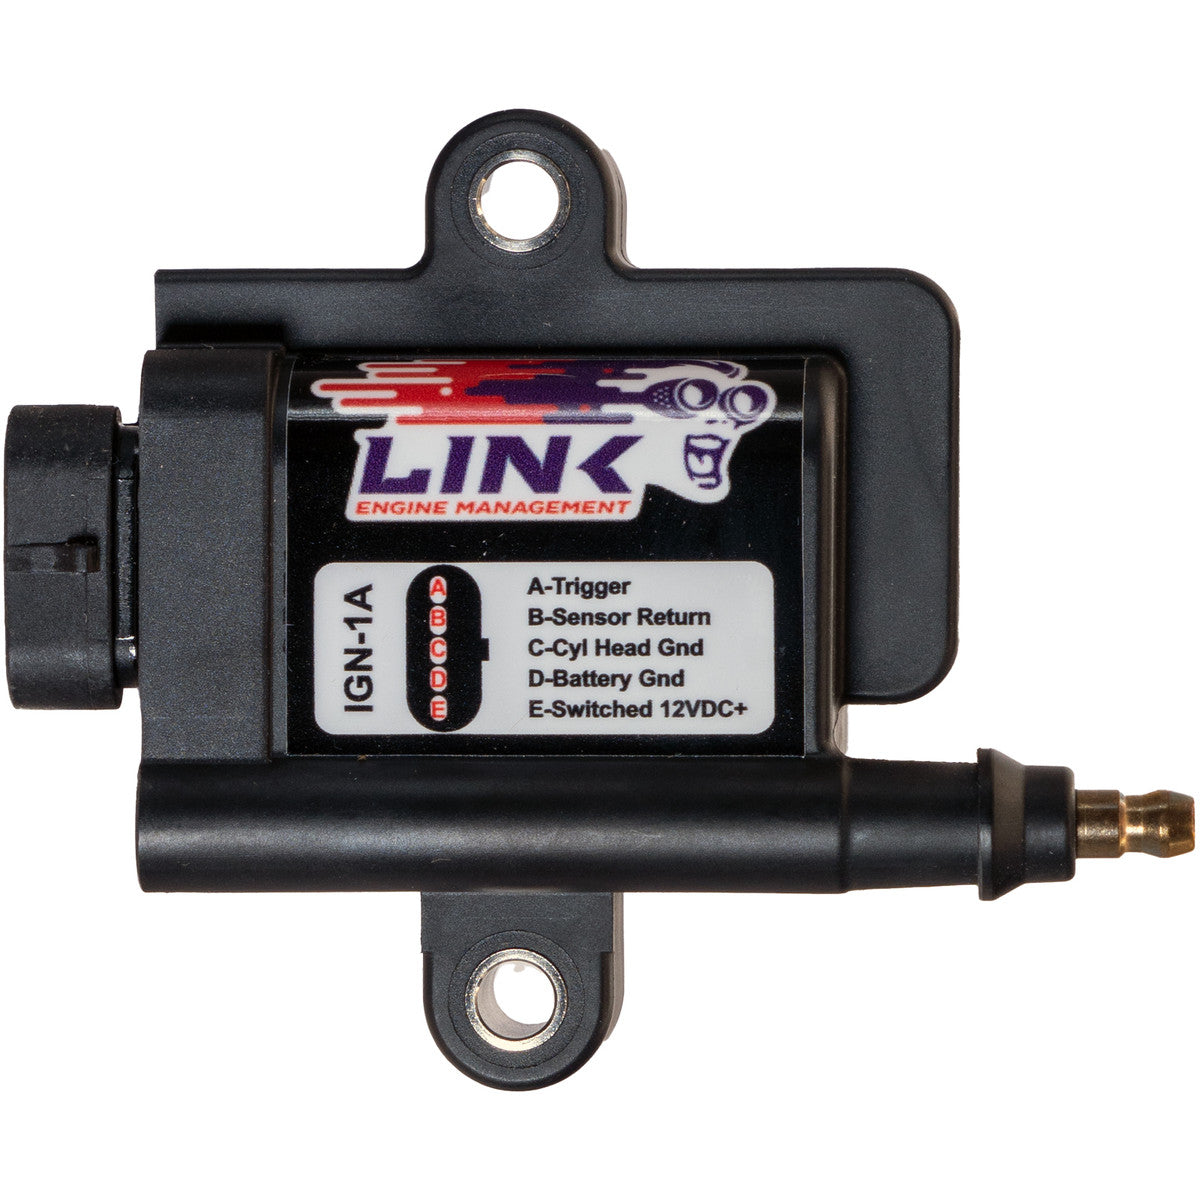 Link ECU IGN1A - High Powered Inductive Smart Coil (Integrated Ignitor)